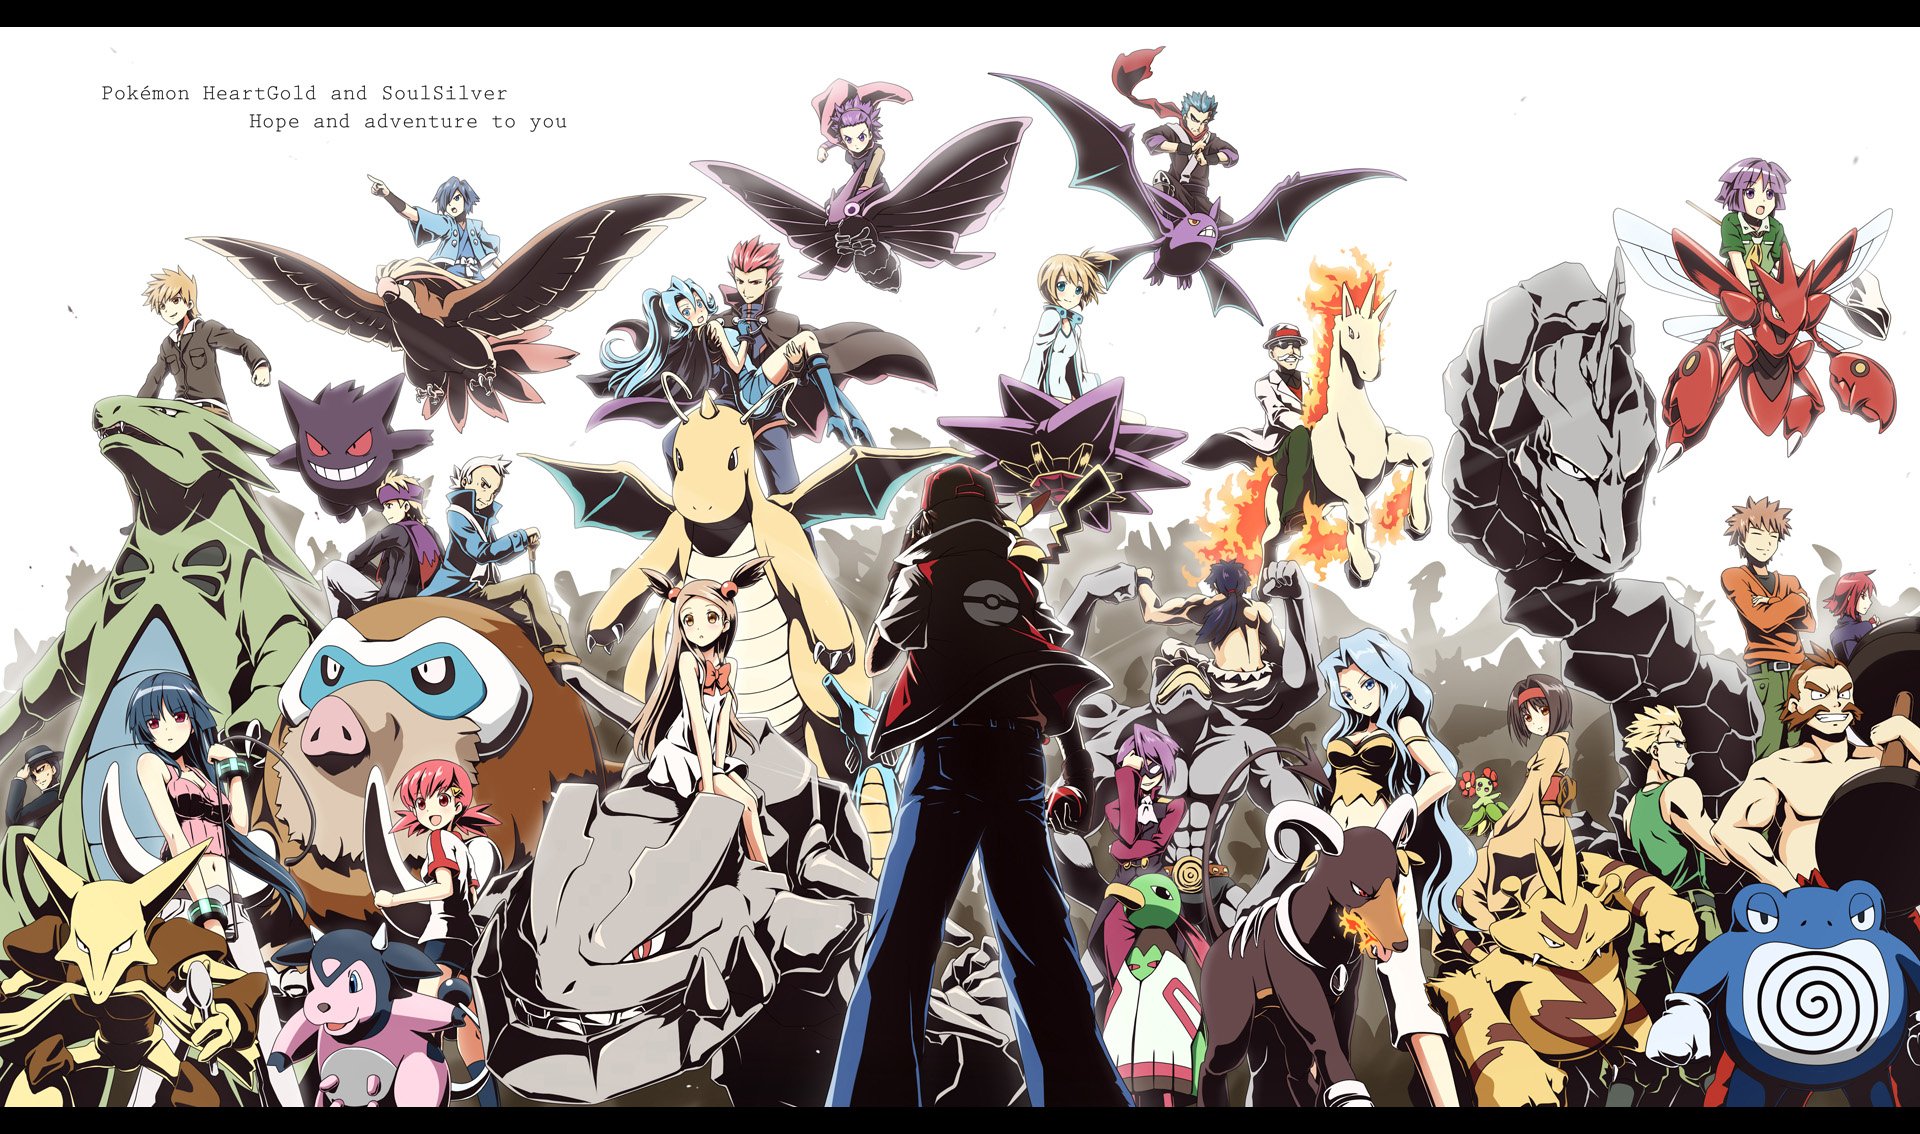 Pokémon: HeartGold and SoulSilver HD Wallpaper and Background Image